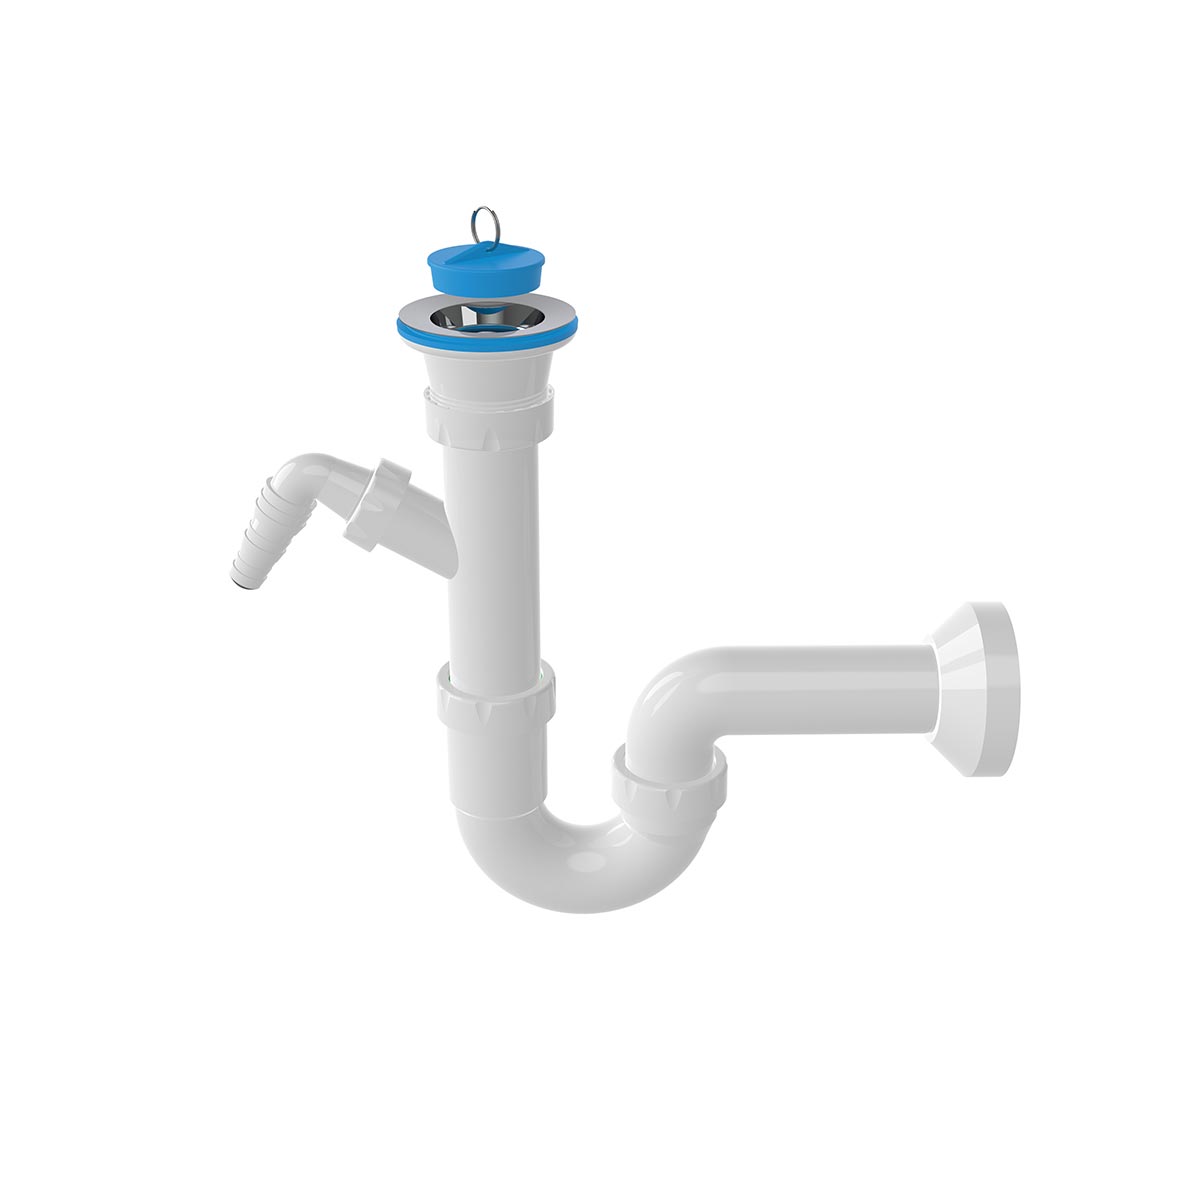 Classic S Trap Siphon For Sinks With Machine Connection Nova